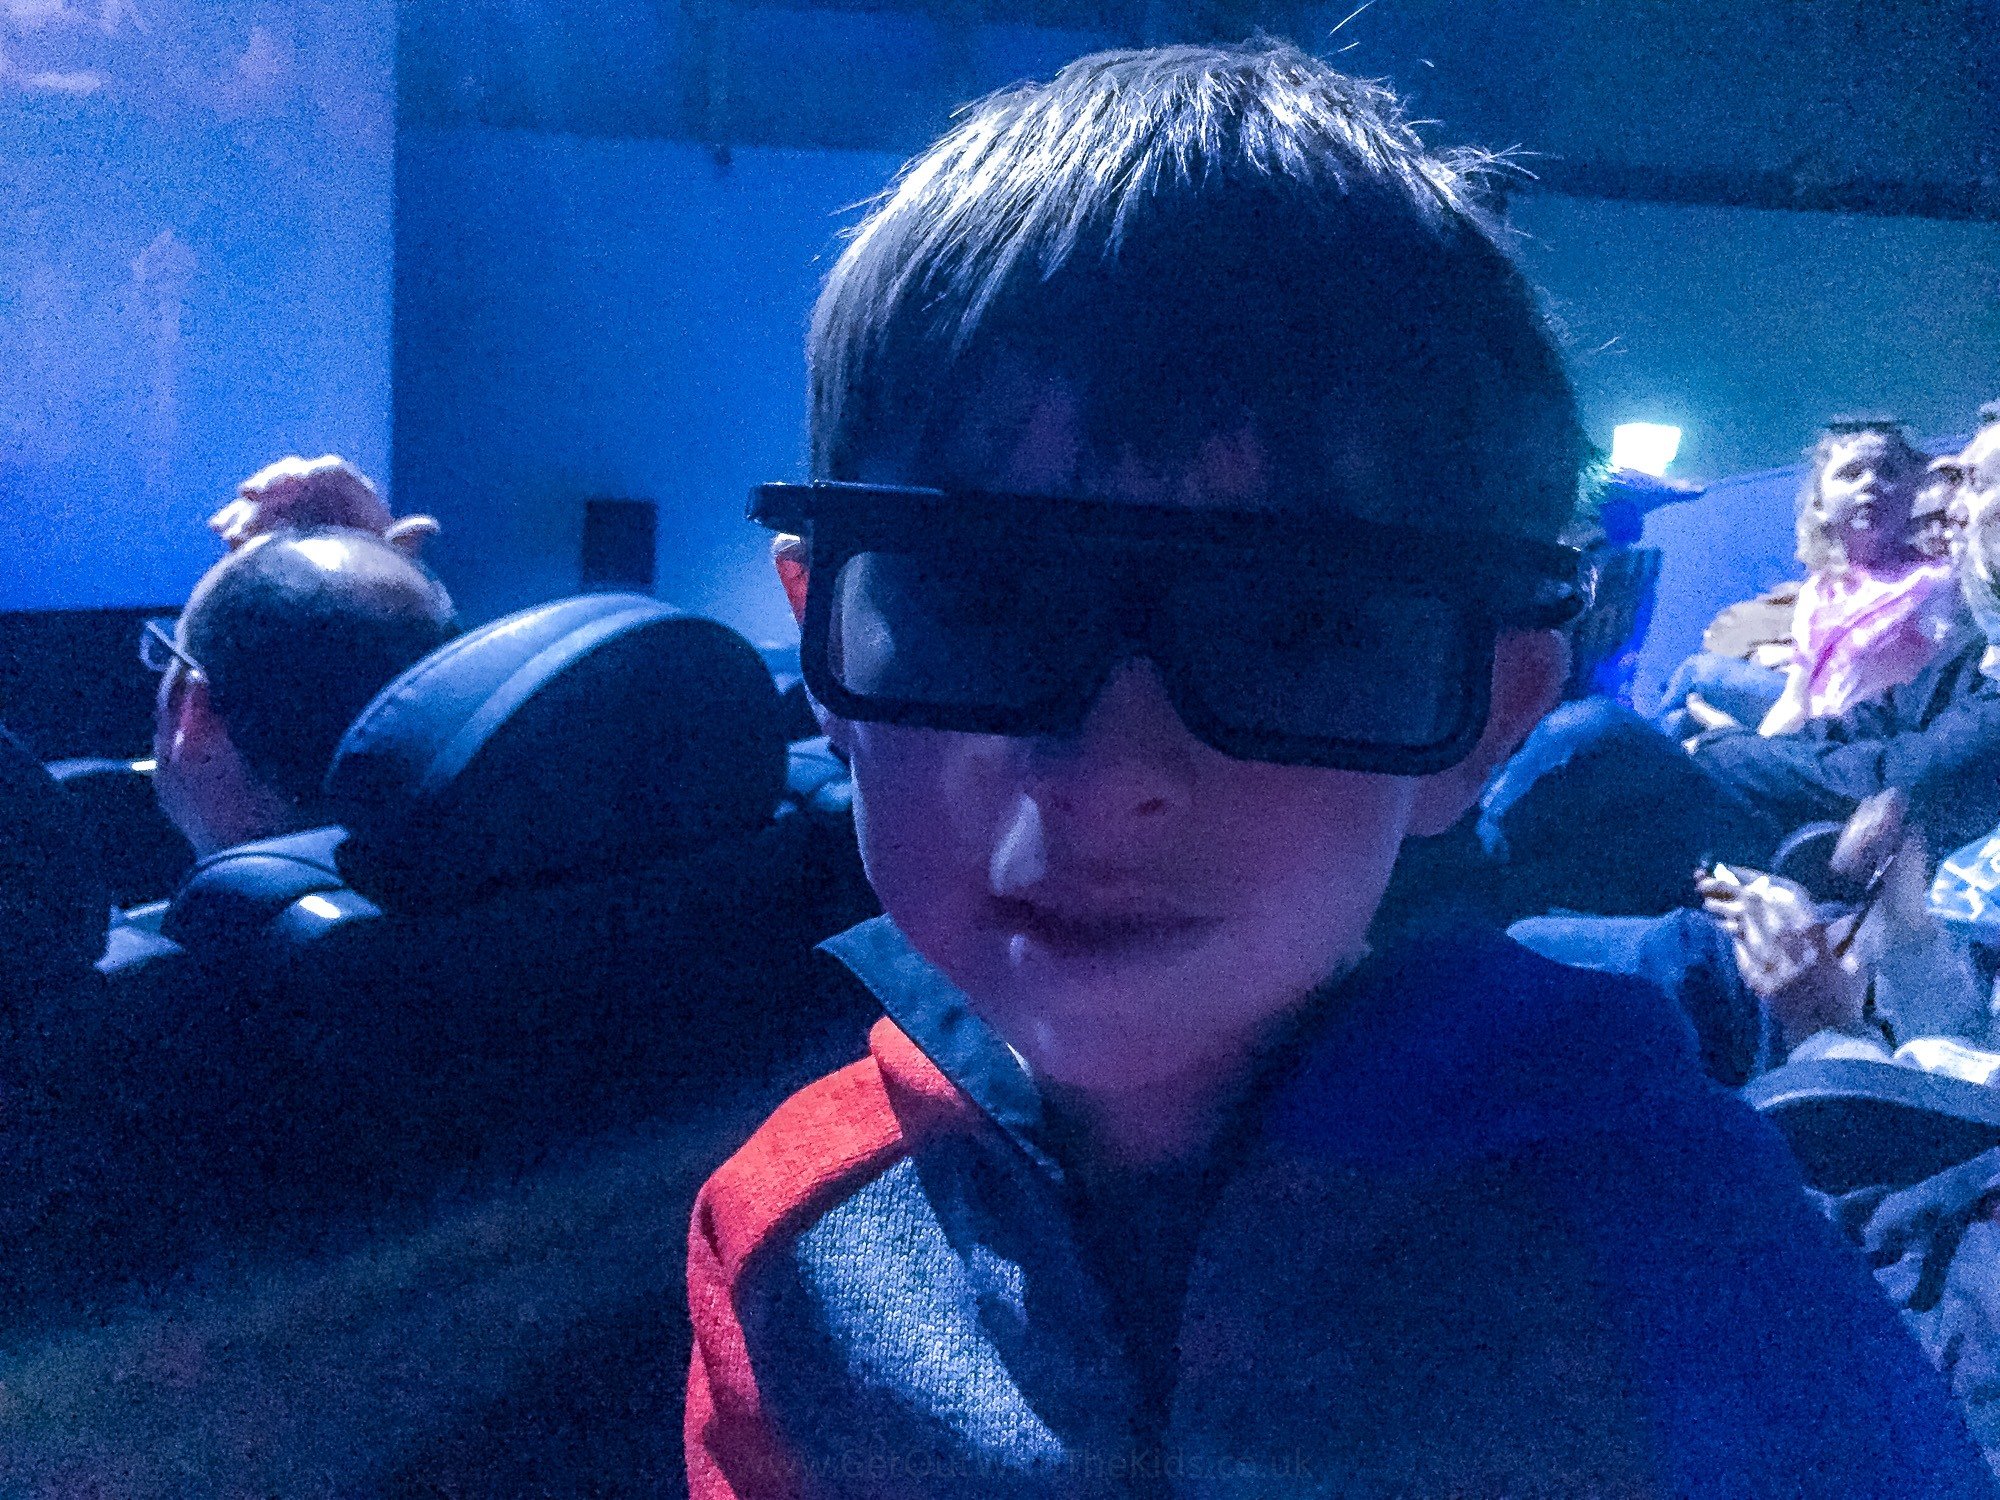 Waiting for the film inside the 4D Cinema